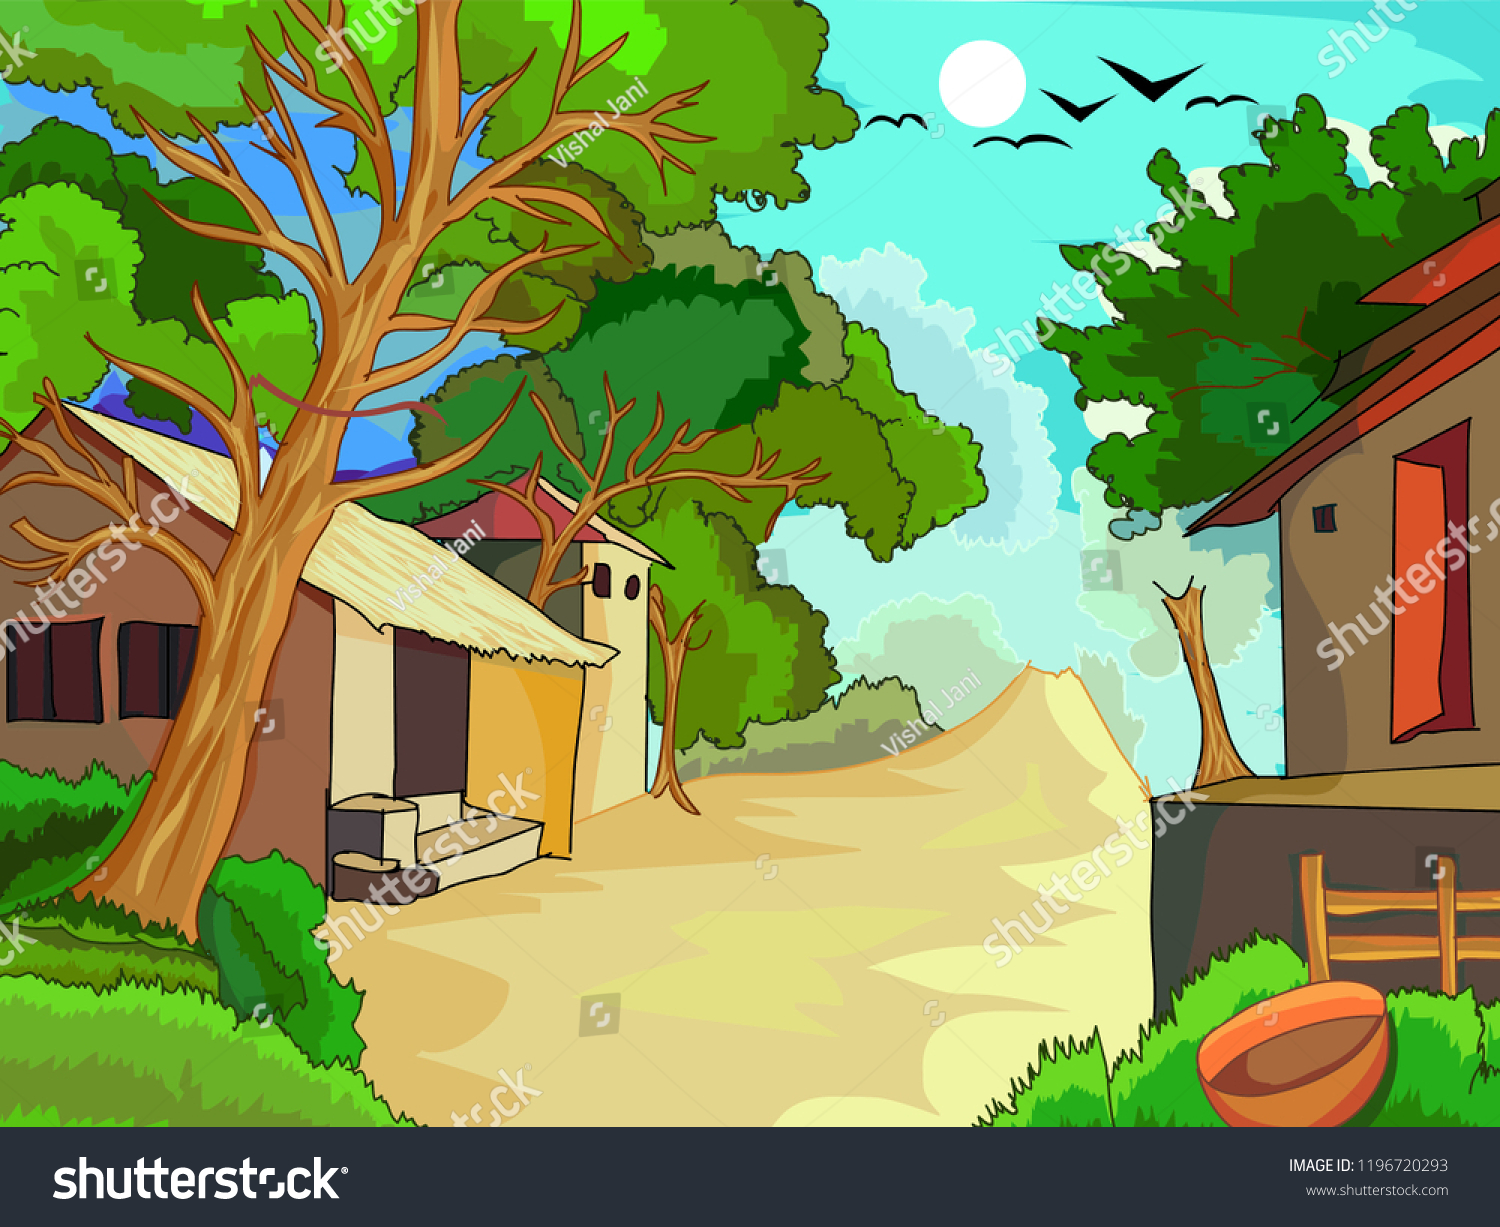 Indian Village House Morning Stock Vector (Royalty Free) 1196720293